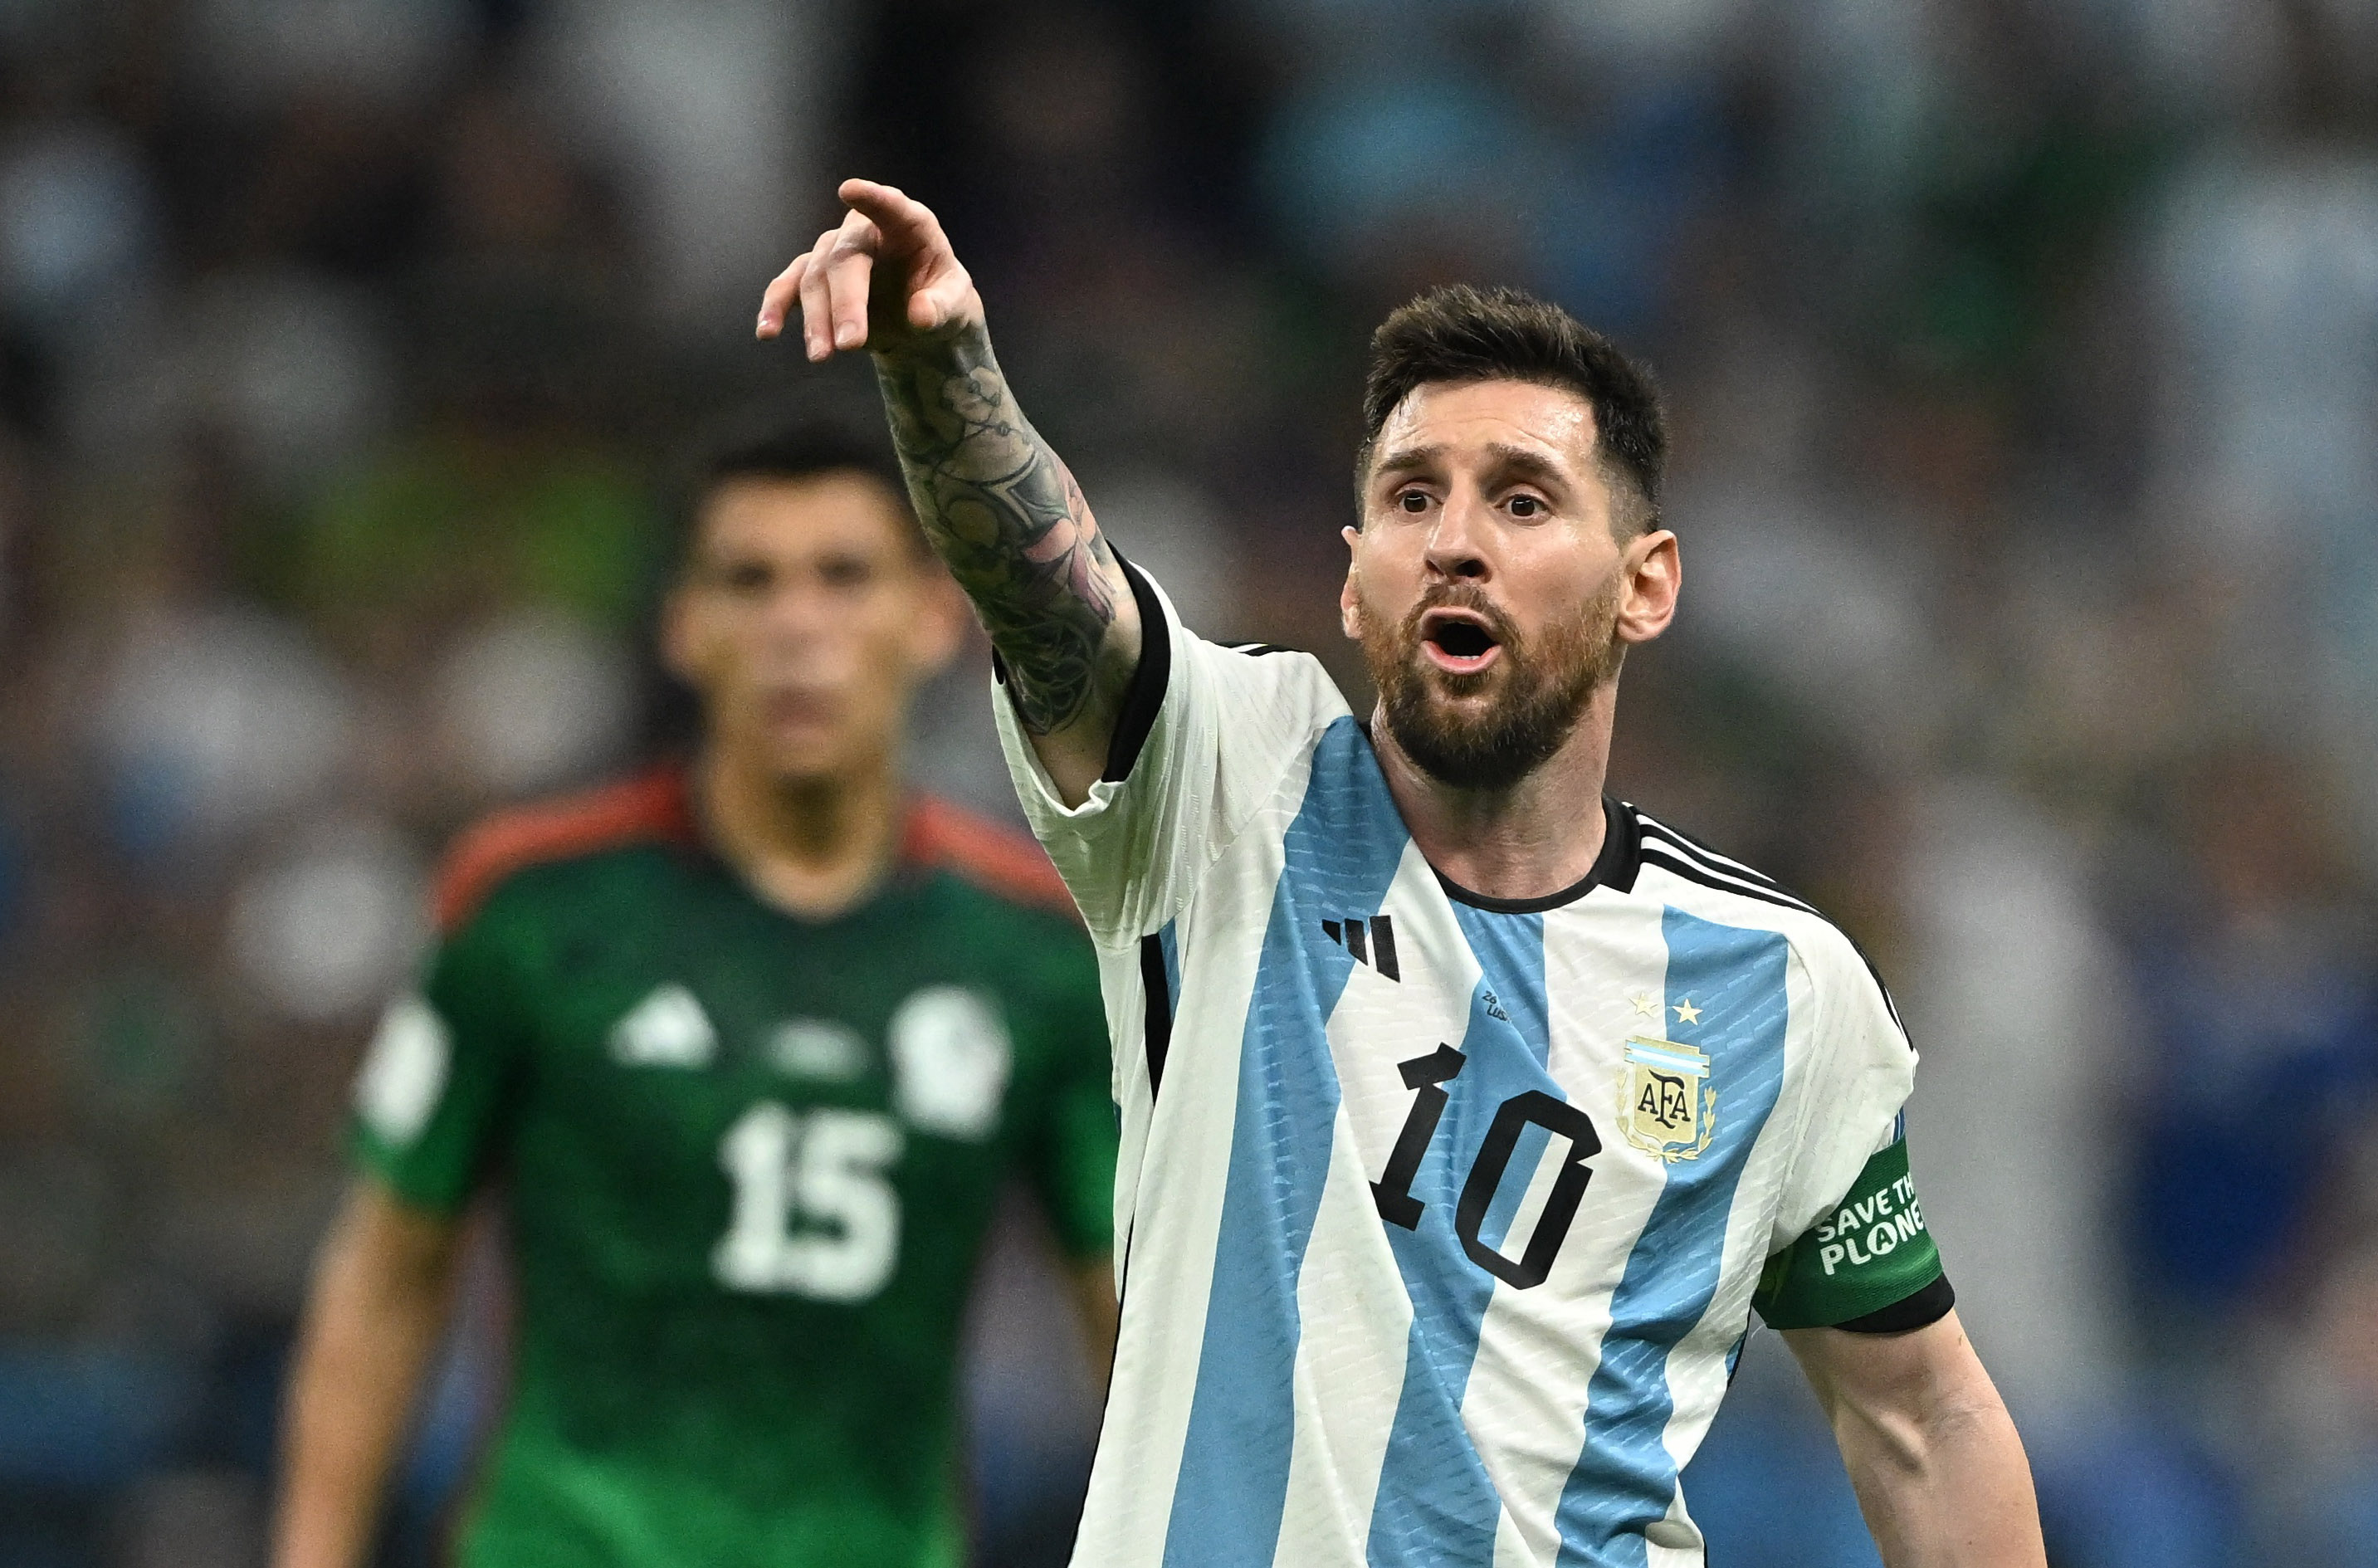 Soccer Football - FIFA World Cup Qatar 2022 - Group C - Argentina v Mexico - Lusail Stadium, Lusail, Qatar - November 26, 2022 Argentina's Lionel Messi reacts REUTERS/Dylan Martinez